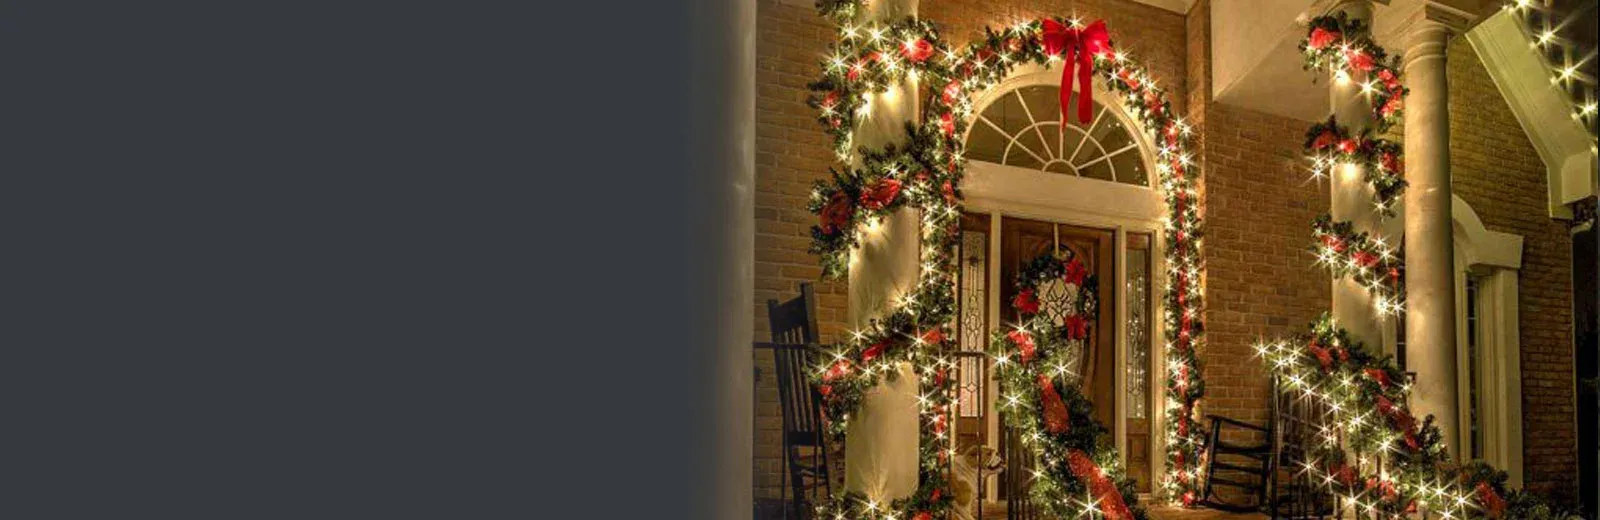 decorating exterior of home for the holidays